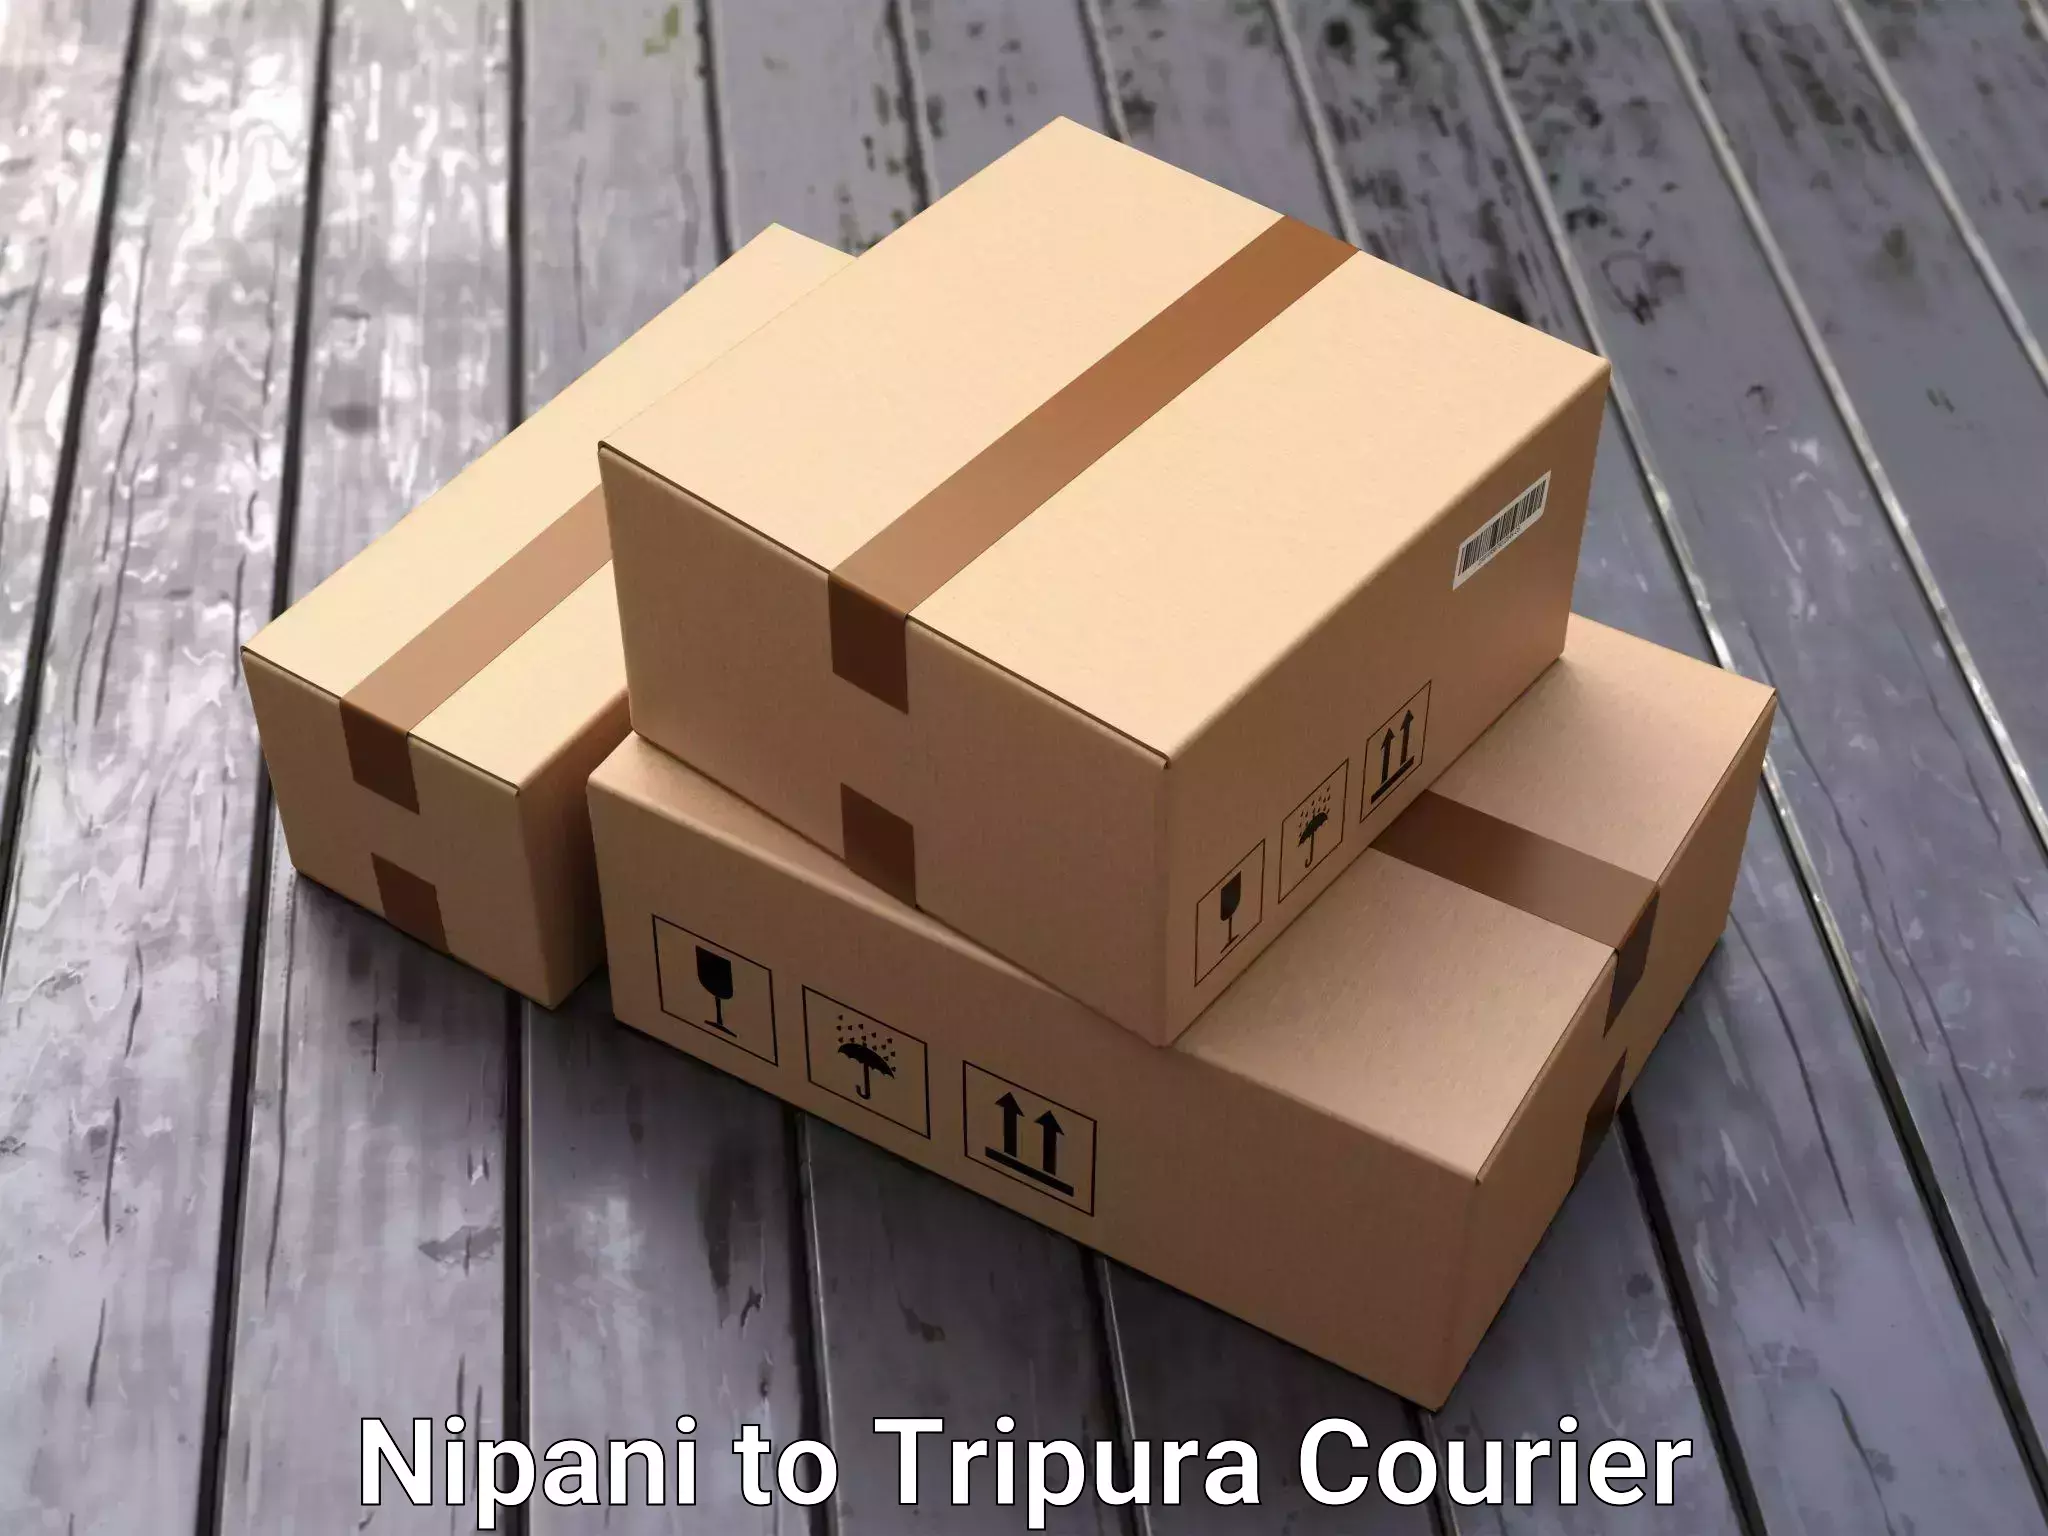 Reliable relocation services Nipani to Udaipur Tripura